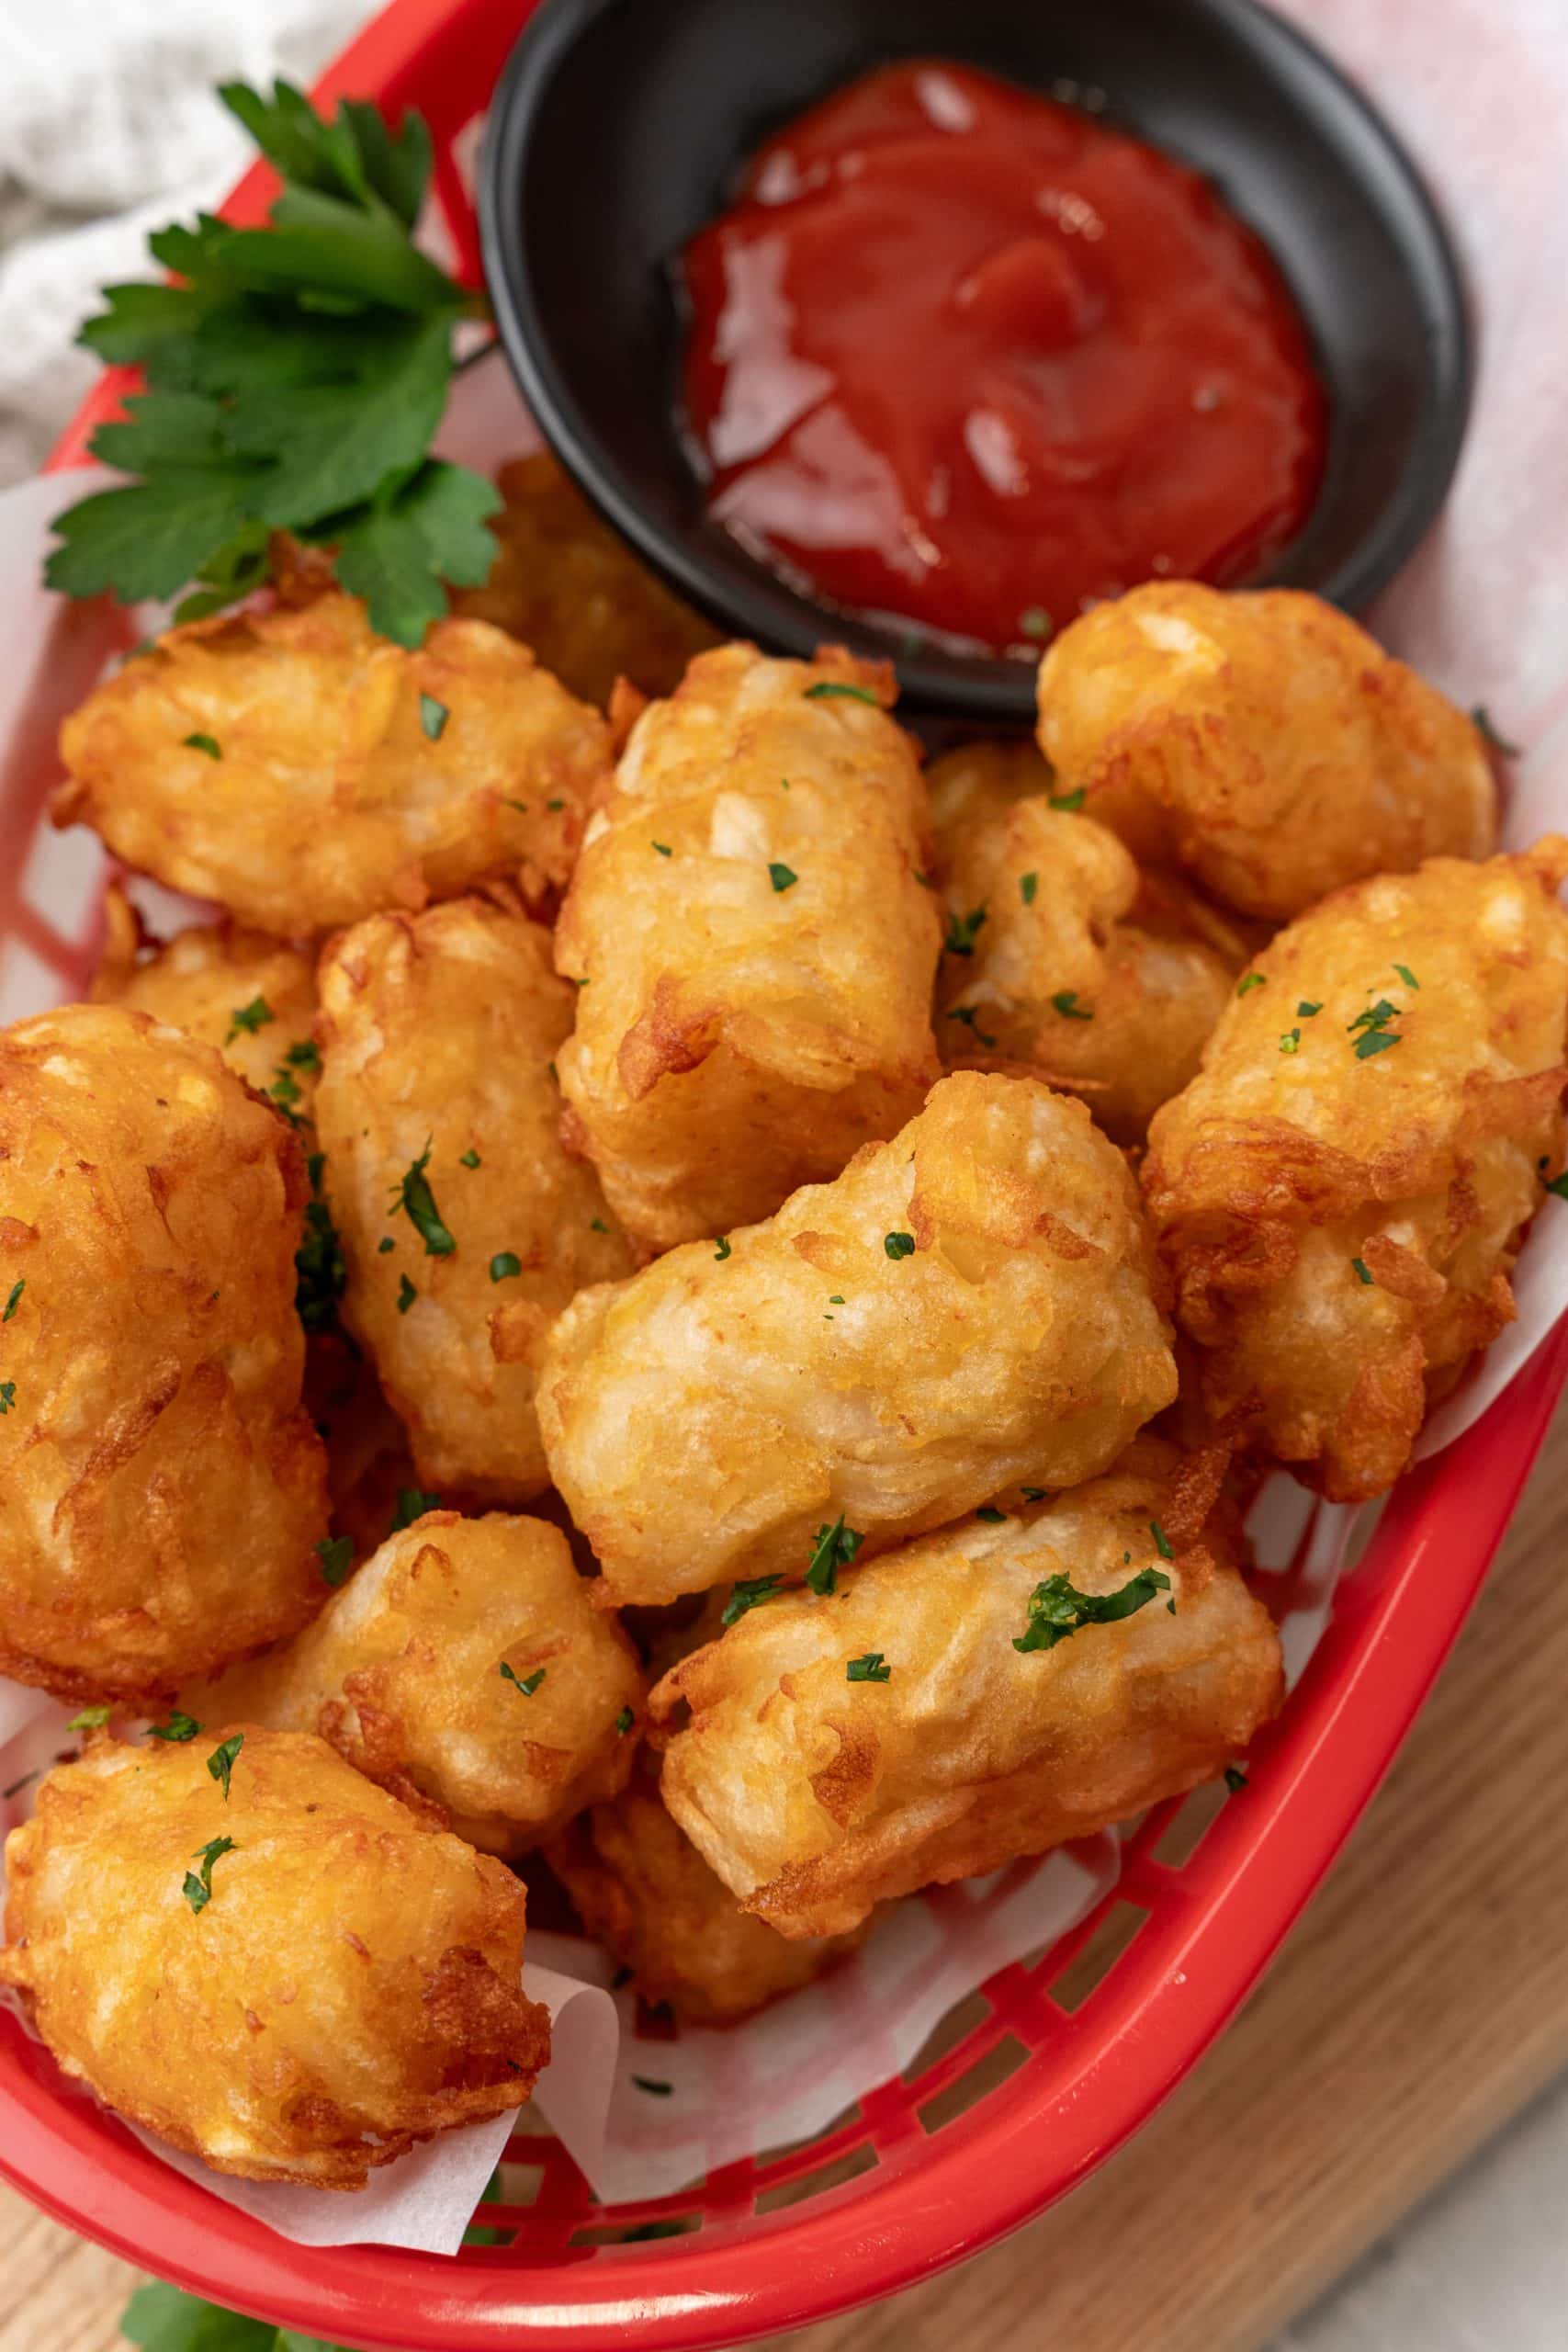 homemade tater tots in a red plastic basket with a cup of ketchup on the side